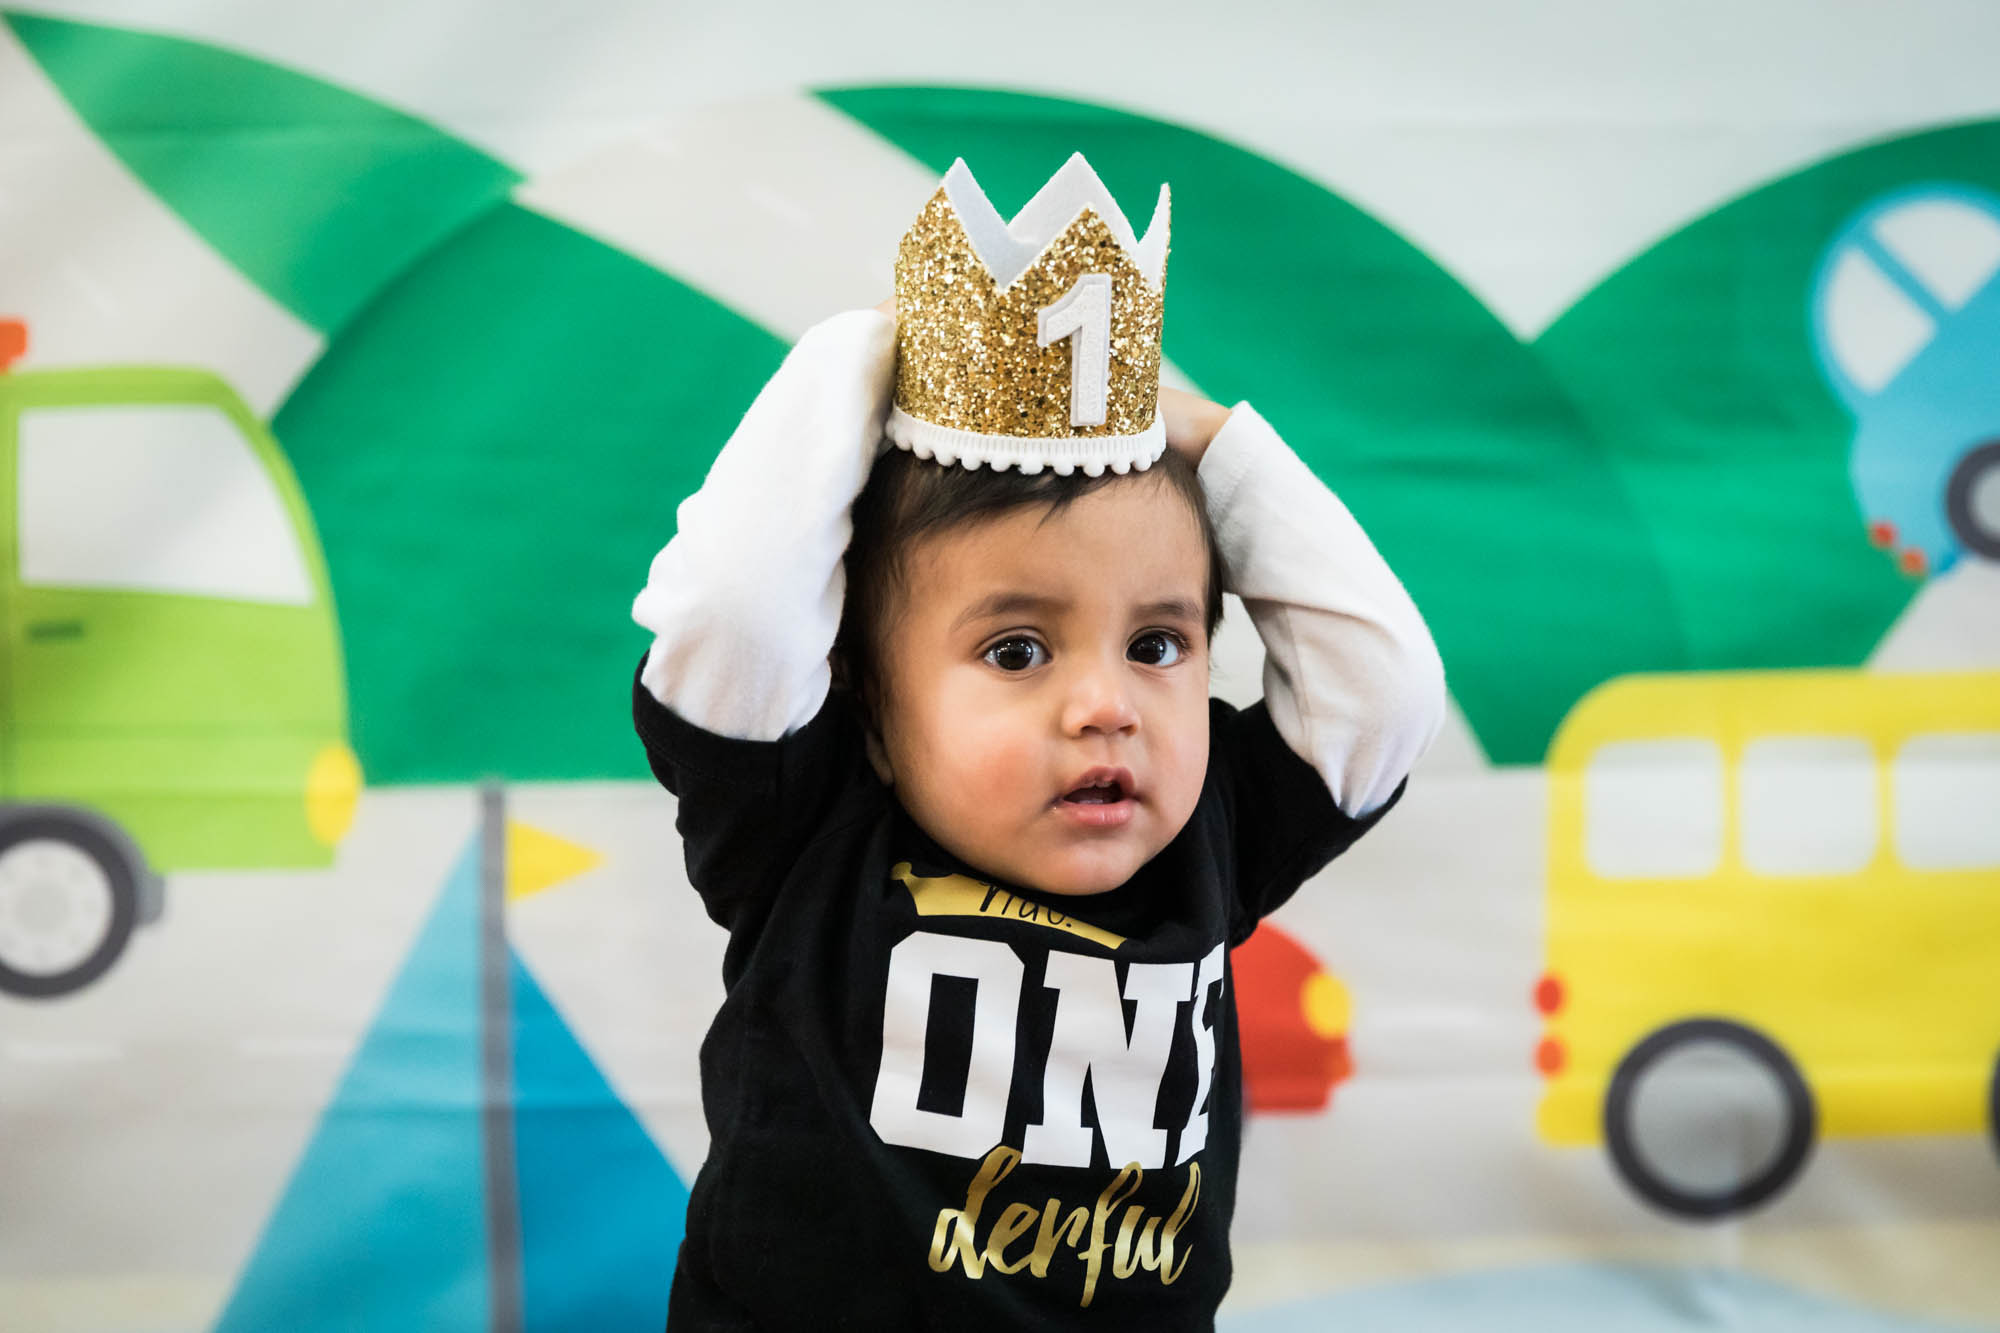 Little boy wearing black t-shirt and clutching gold crown on his head in front of colorful background during a Queens family portrait